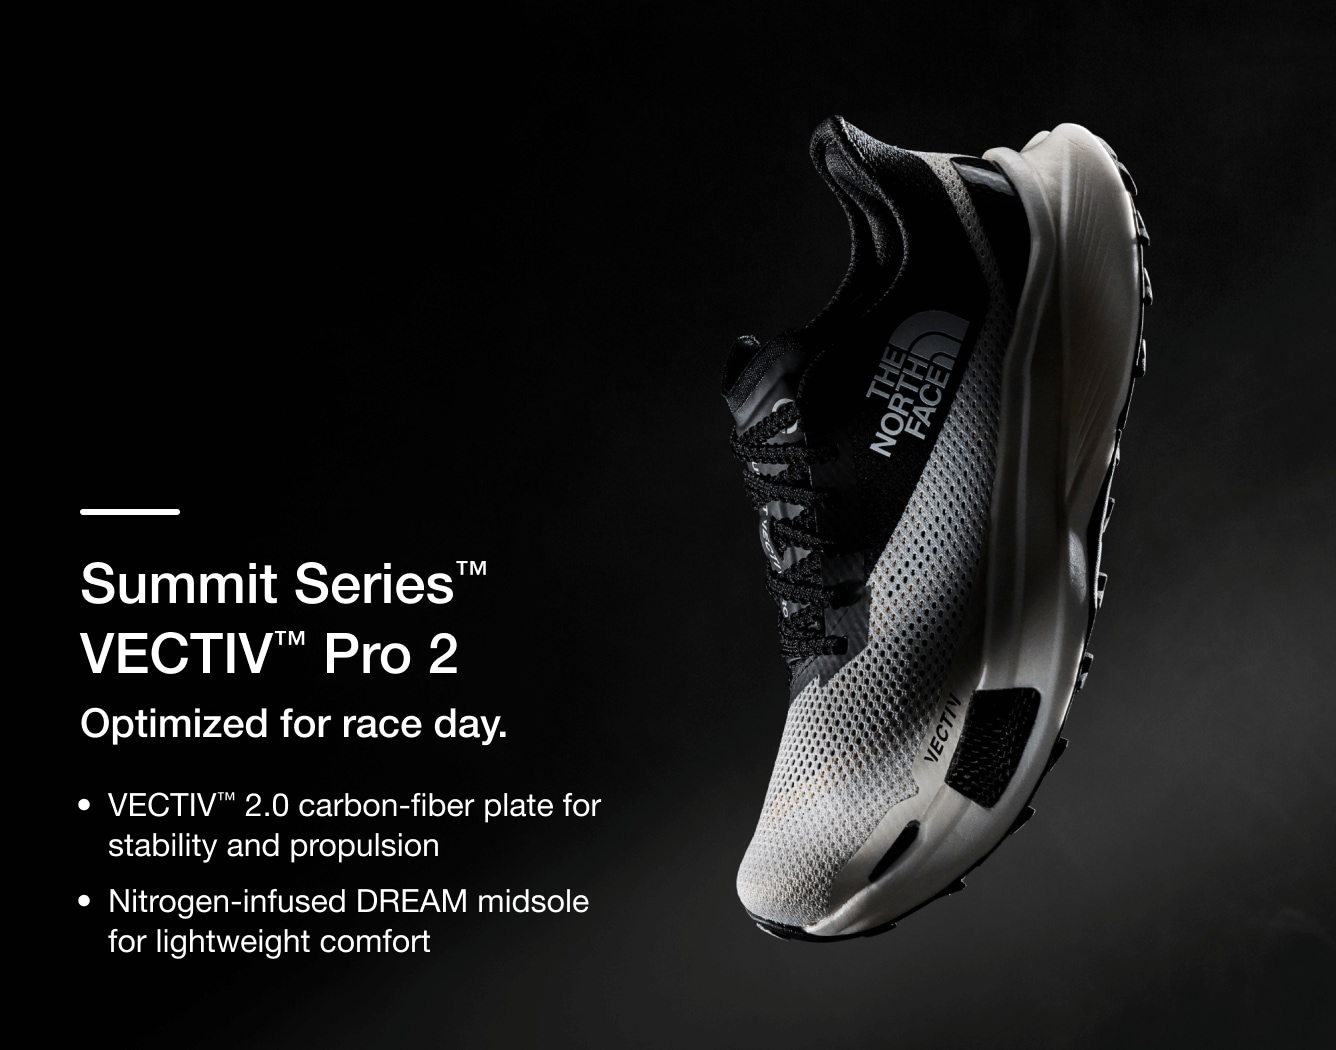 Studio shot of the VECTIV Pro trail running shoe from The North Face with text overlay detailing features.